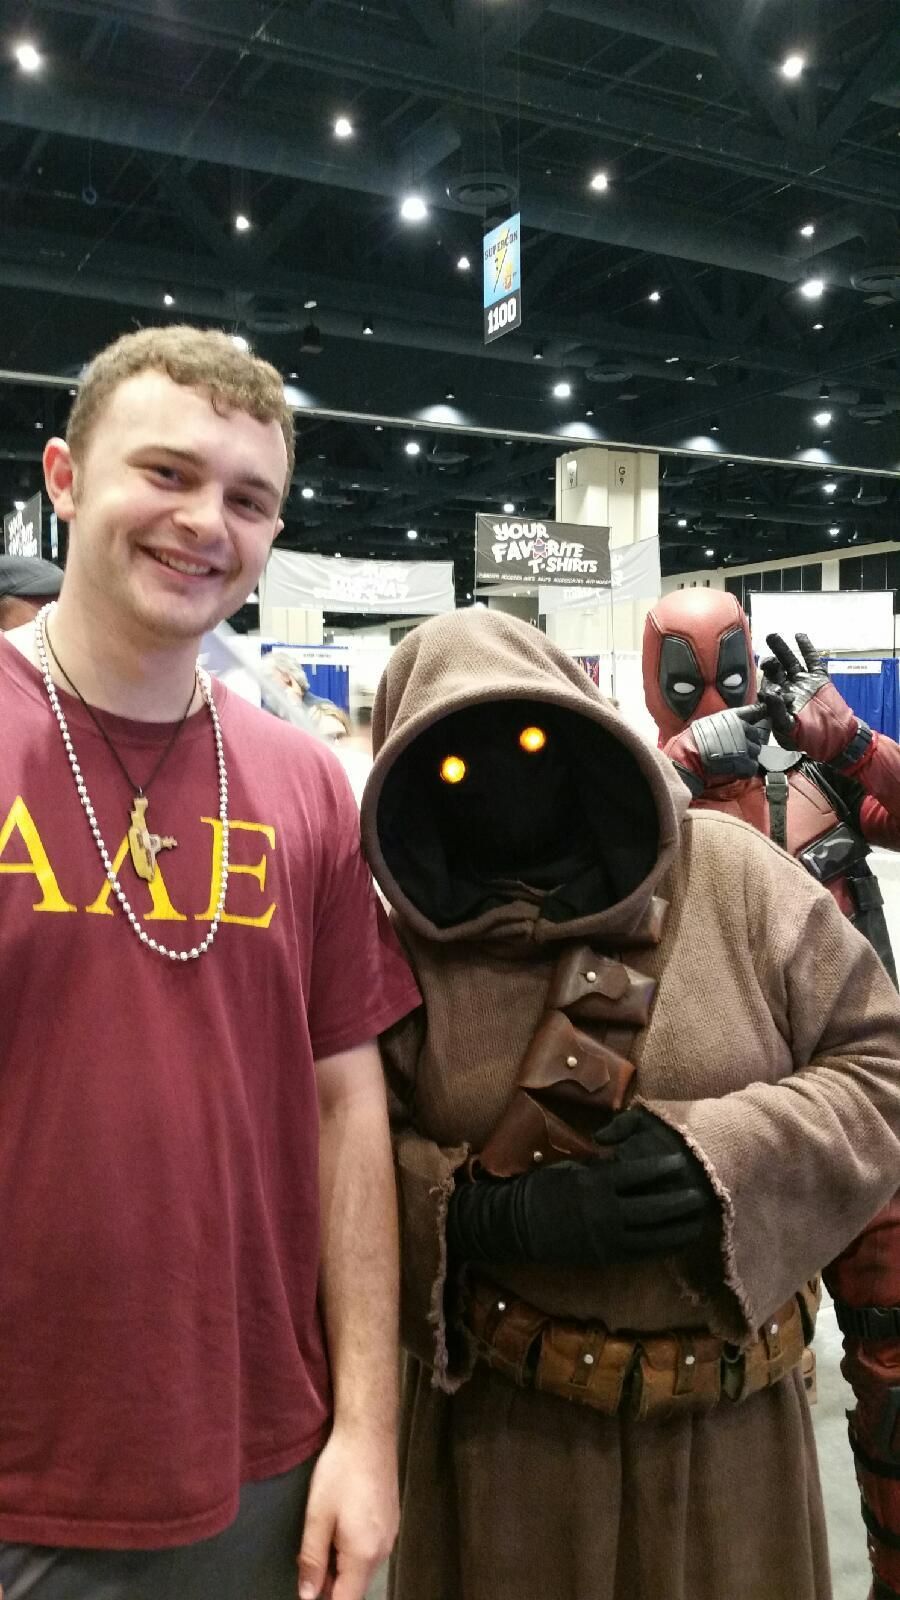 At supercon I was taking a picture with a Jawa.. didn't realize the deadpool till I got home